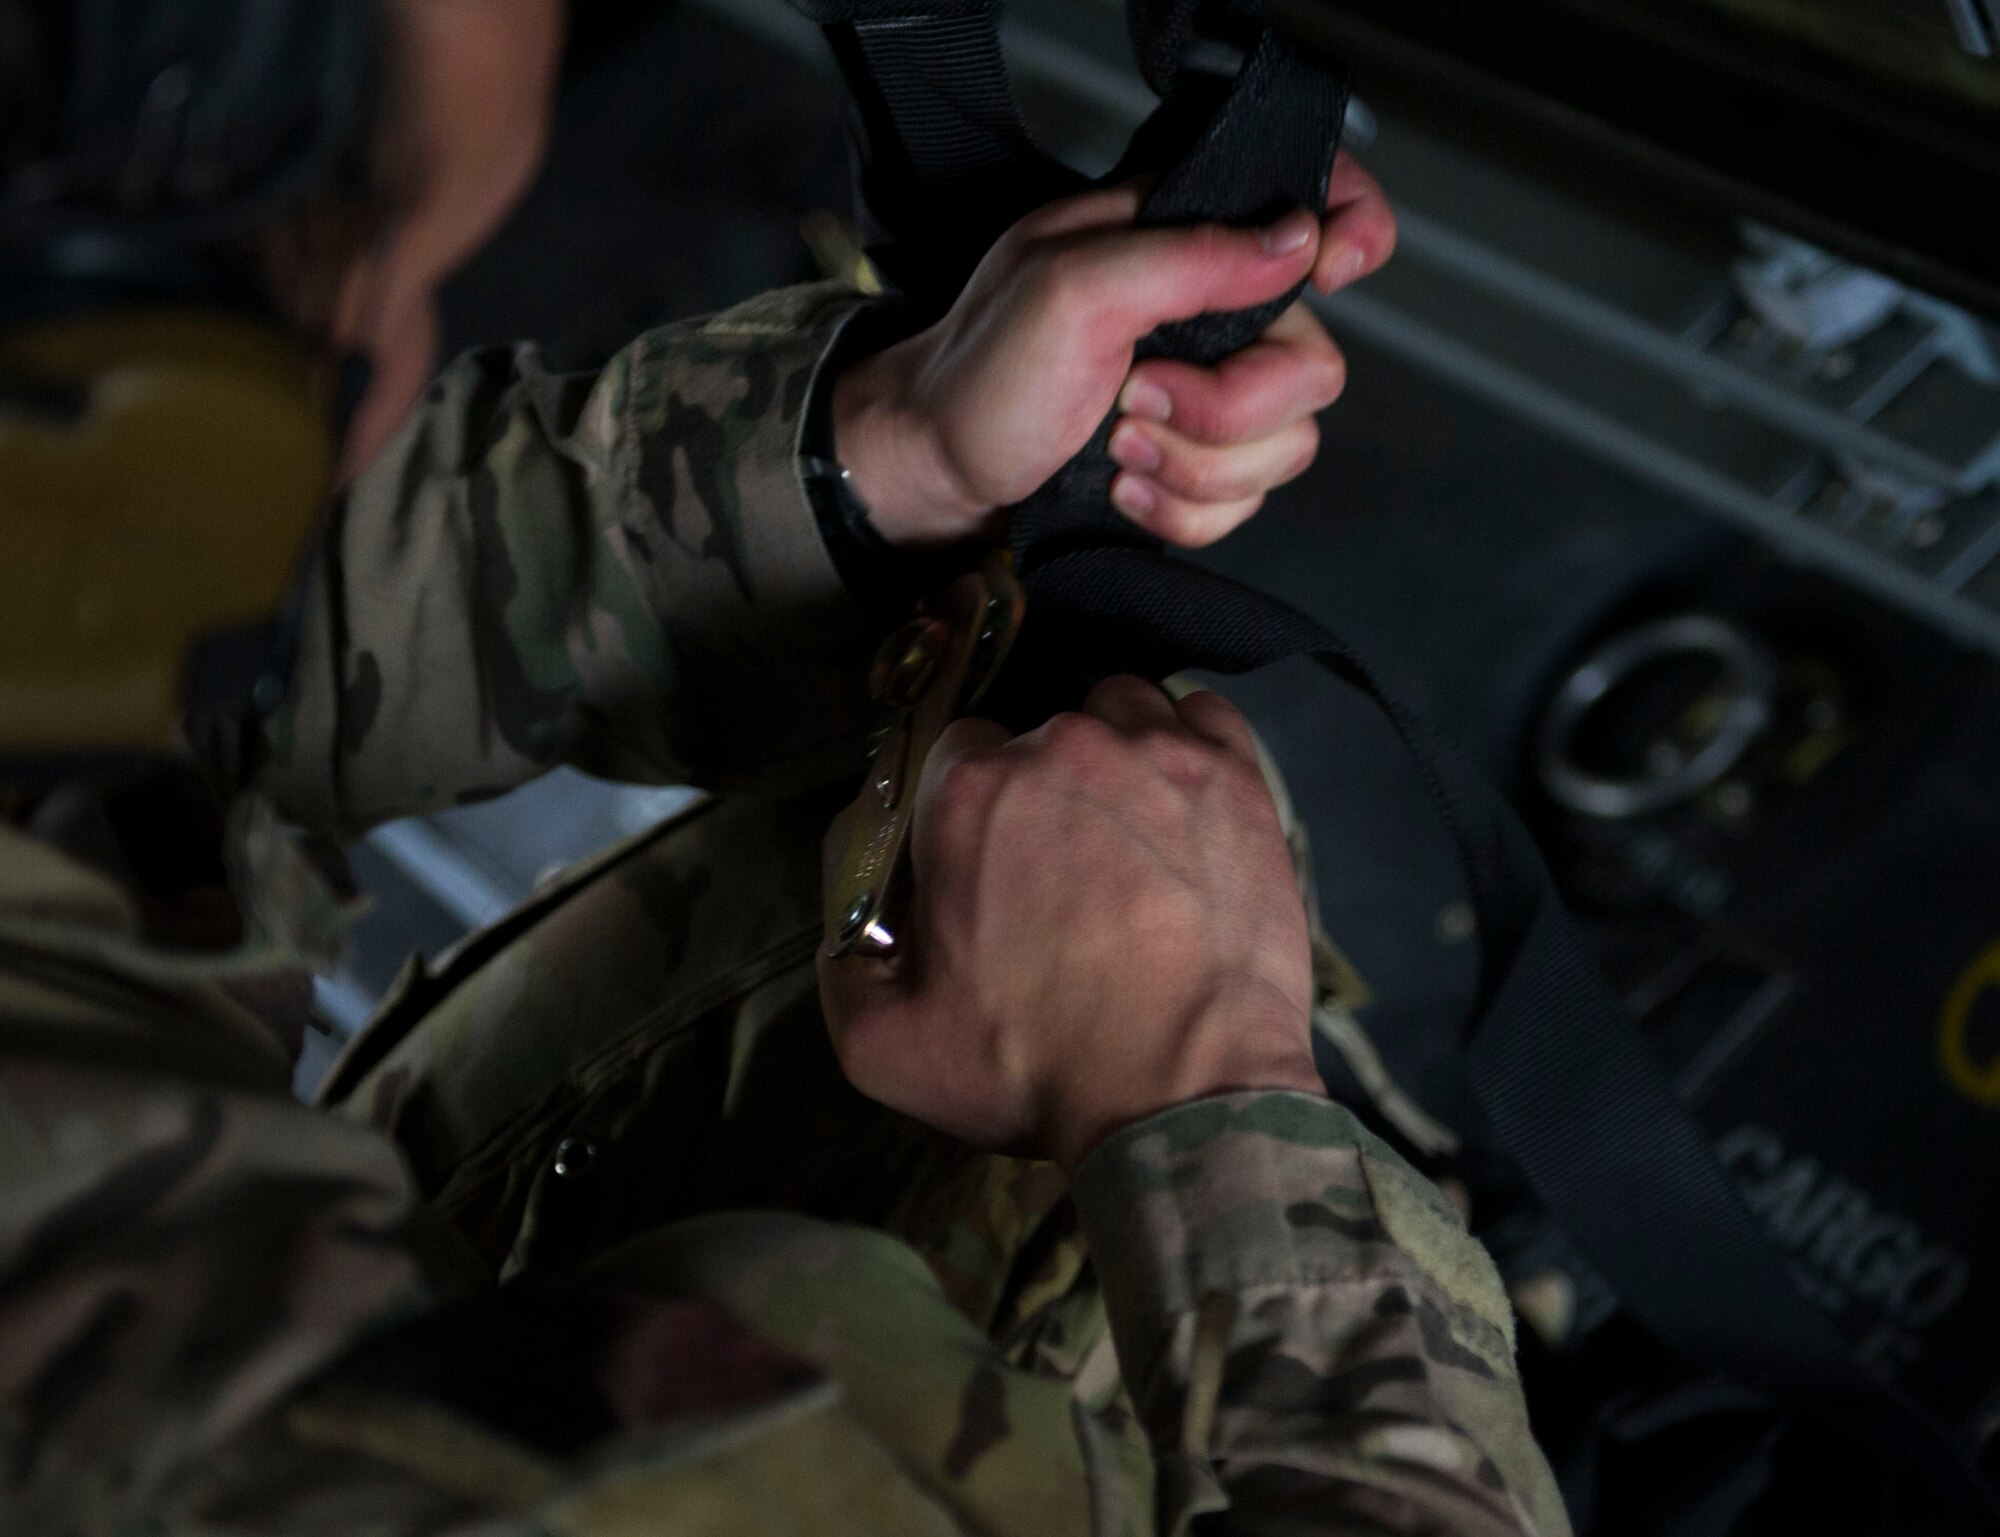 Staff Sgt. Samuel Levander, a flight engineer with the 8th Special Operations Squadron, tightens down a strap on a CV-22 Osprey at Hurlburt Field, Fla., April 27, 2016. The 8th SOS is one of the oldest units in the United States Air Force, originally organized as the 8th Aero Squadron, June 21, 1917, at Kelly Field, Texas.  (U.S. Air Force photo by Senior Airman Krystal M. Garrett)